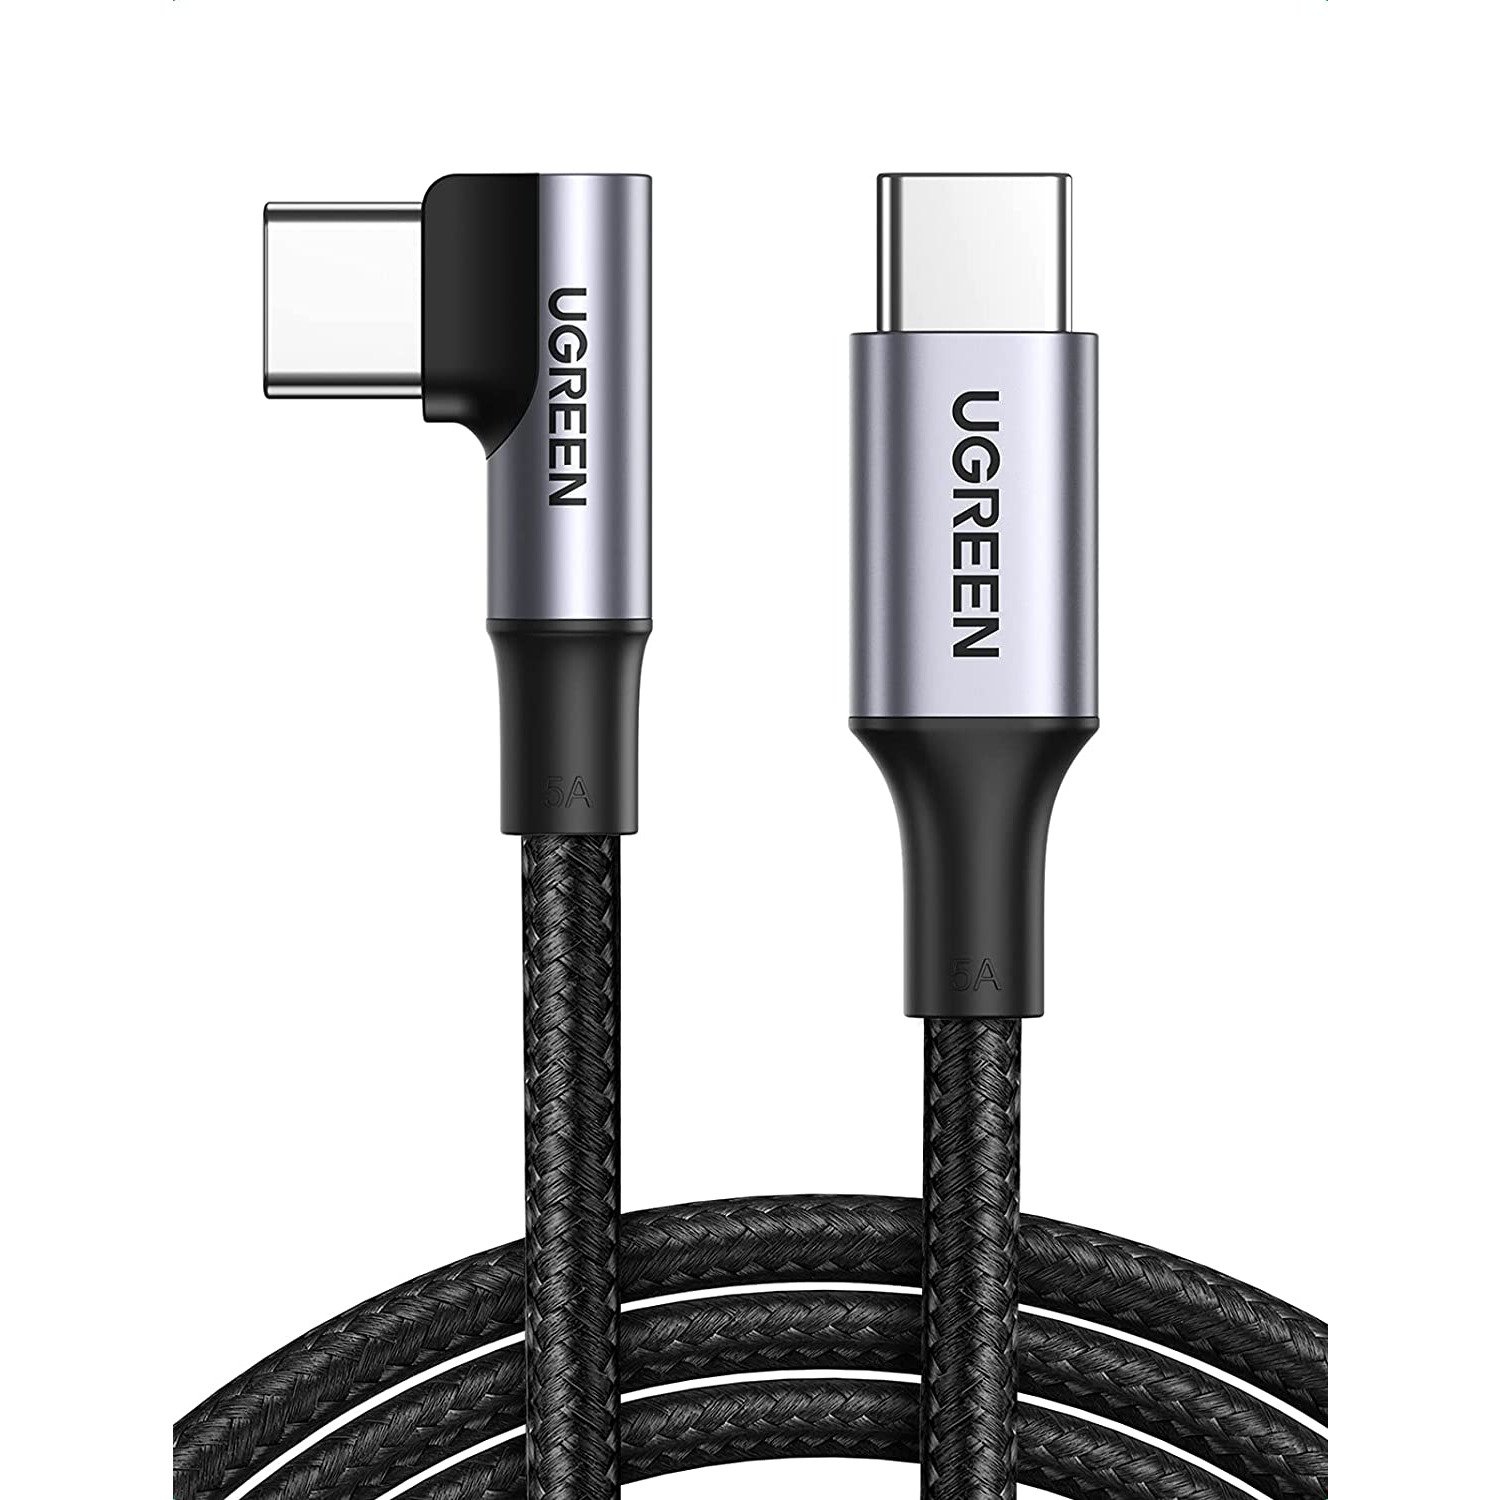 USB C to C cable 5A 100W 90 degree 2.0 Type C power 6 feet UGREEN